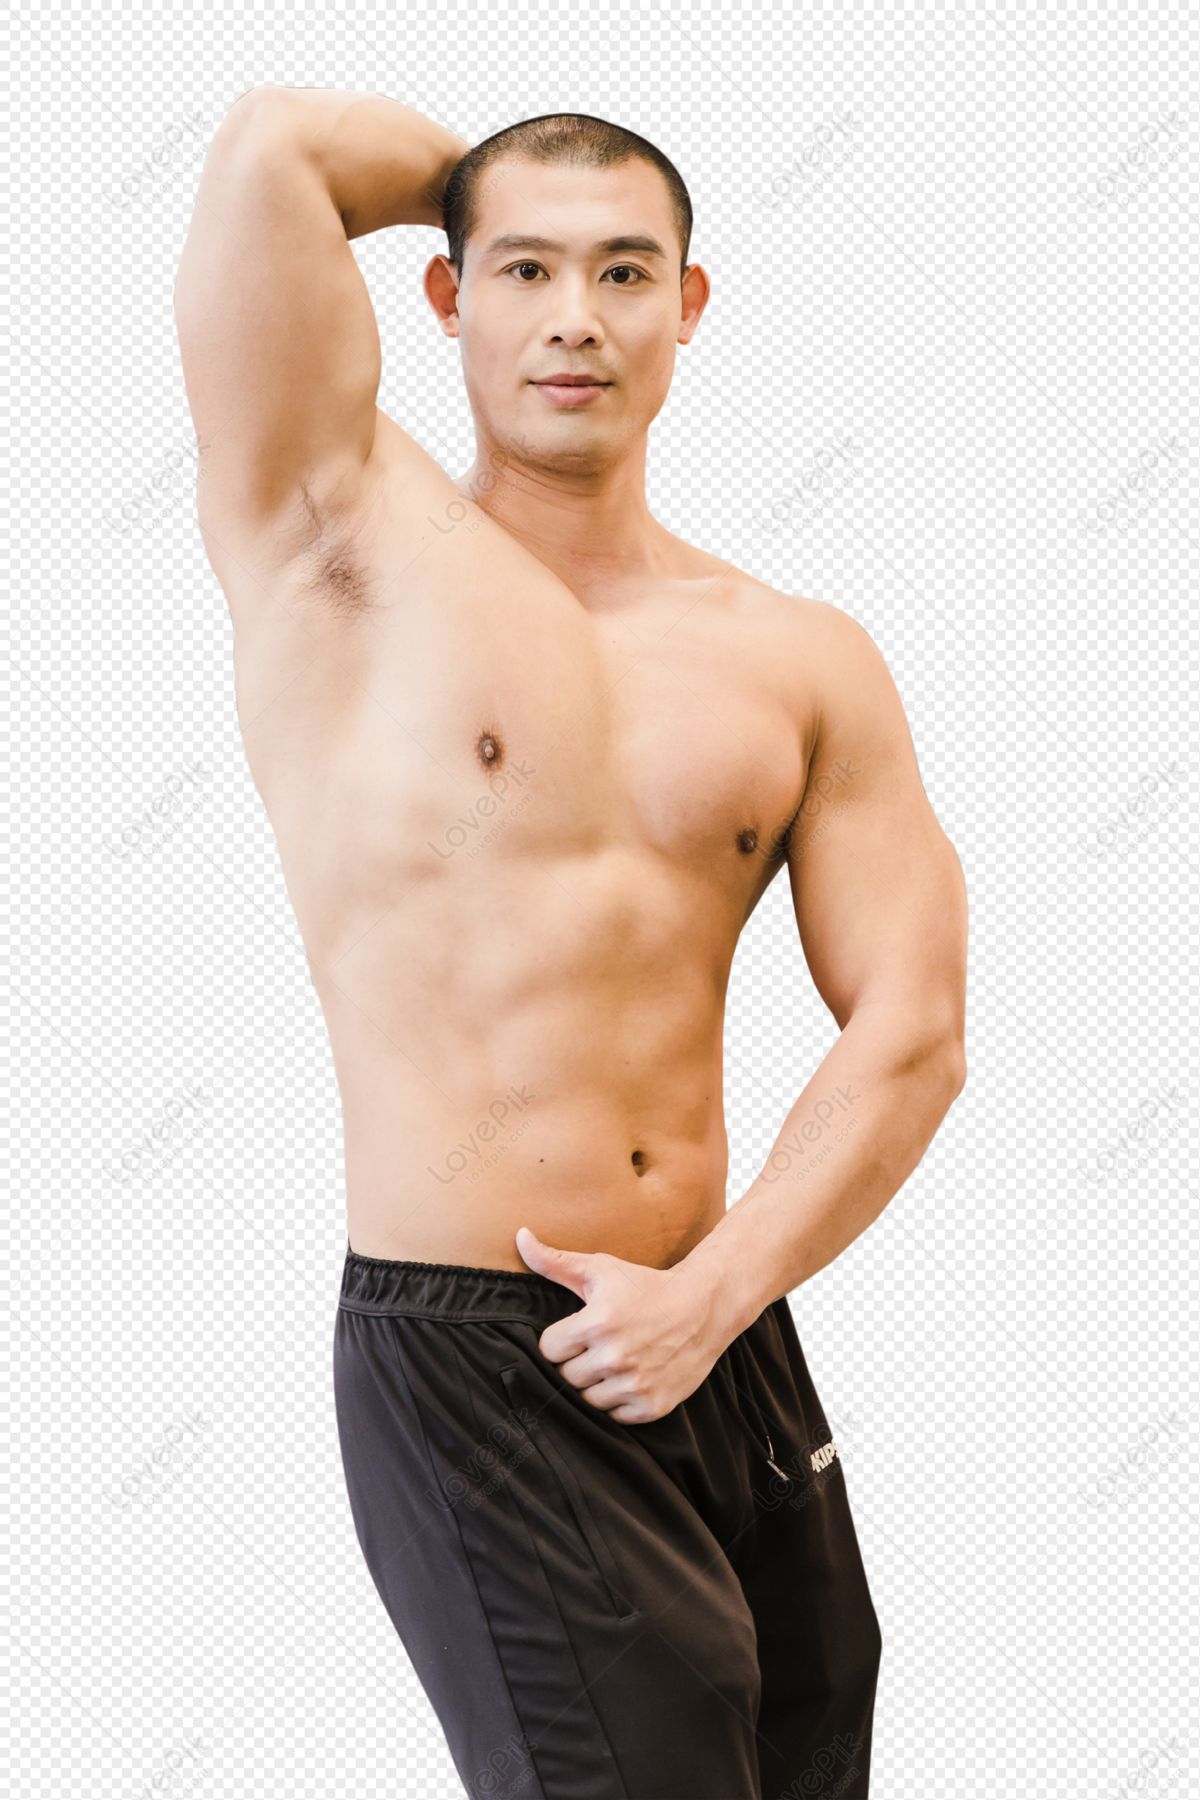 Gym Fitness Men Muscle Show PNG Transparent Image And Clipart Image For  Free Download - Lovepik | 400780697